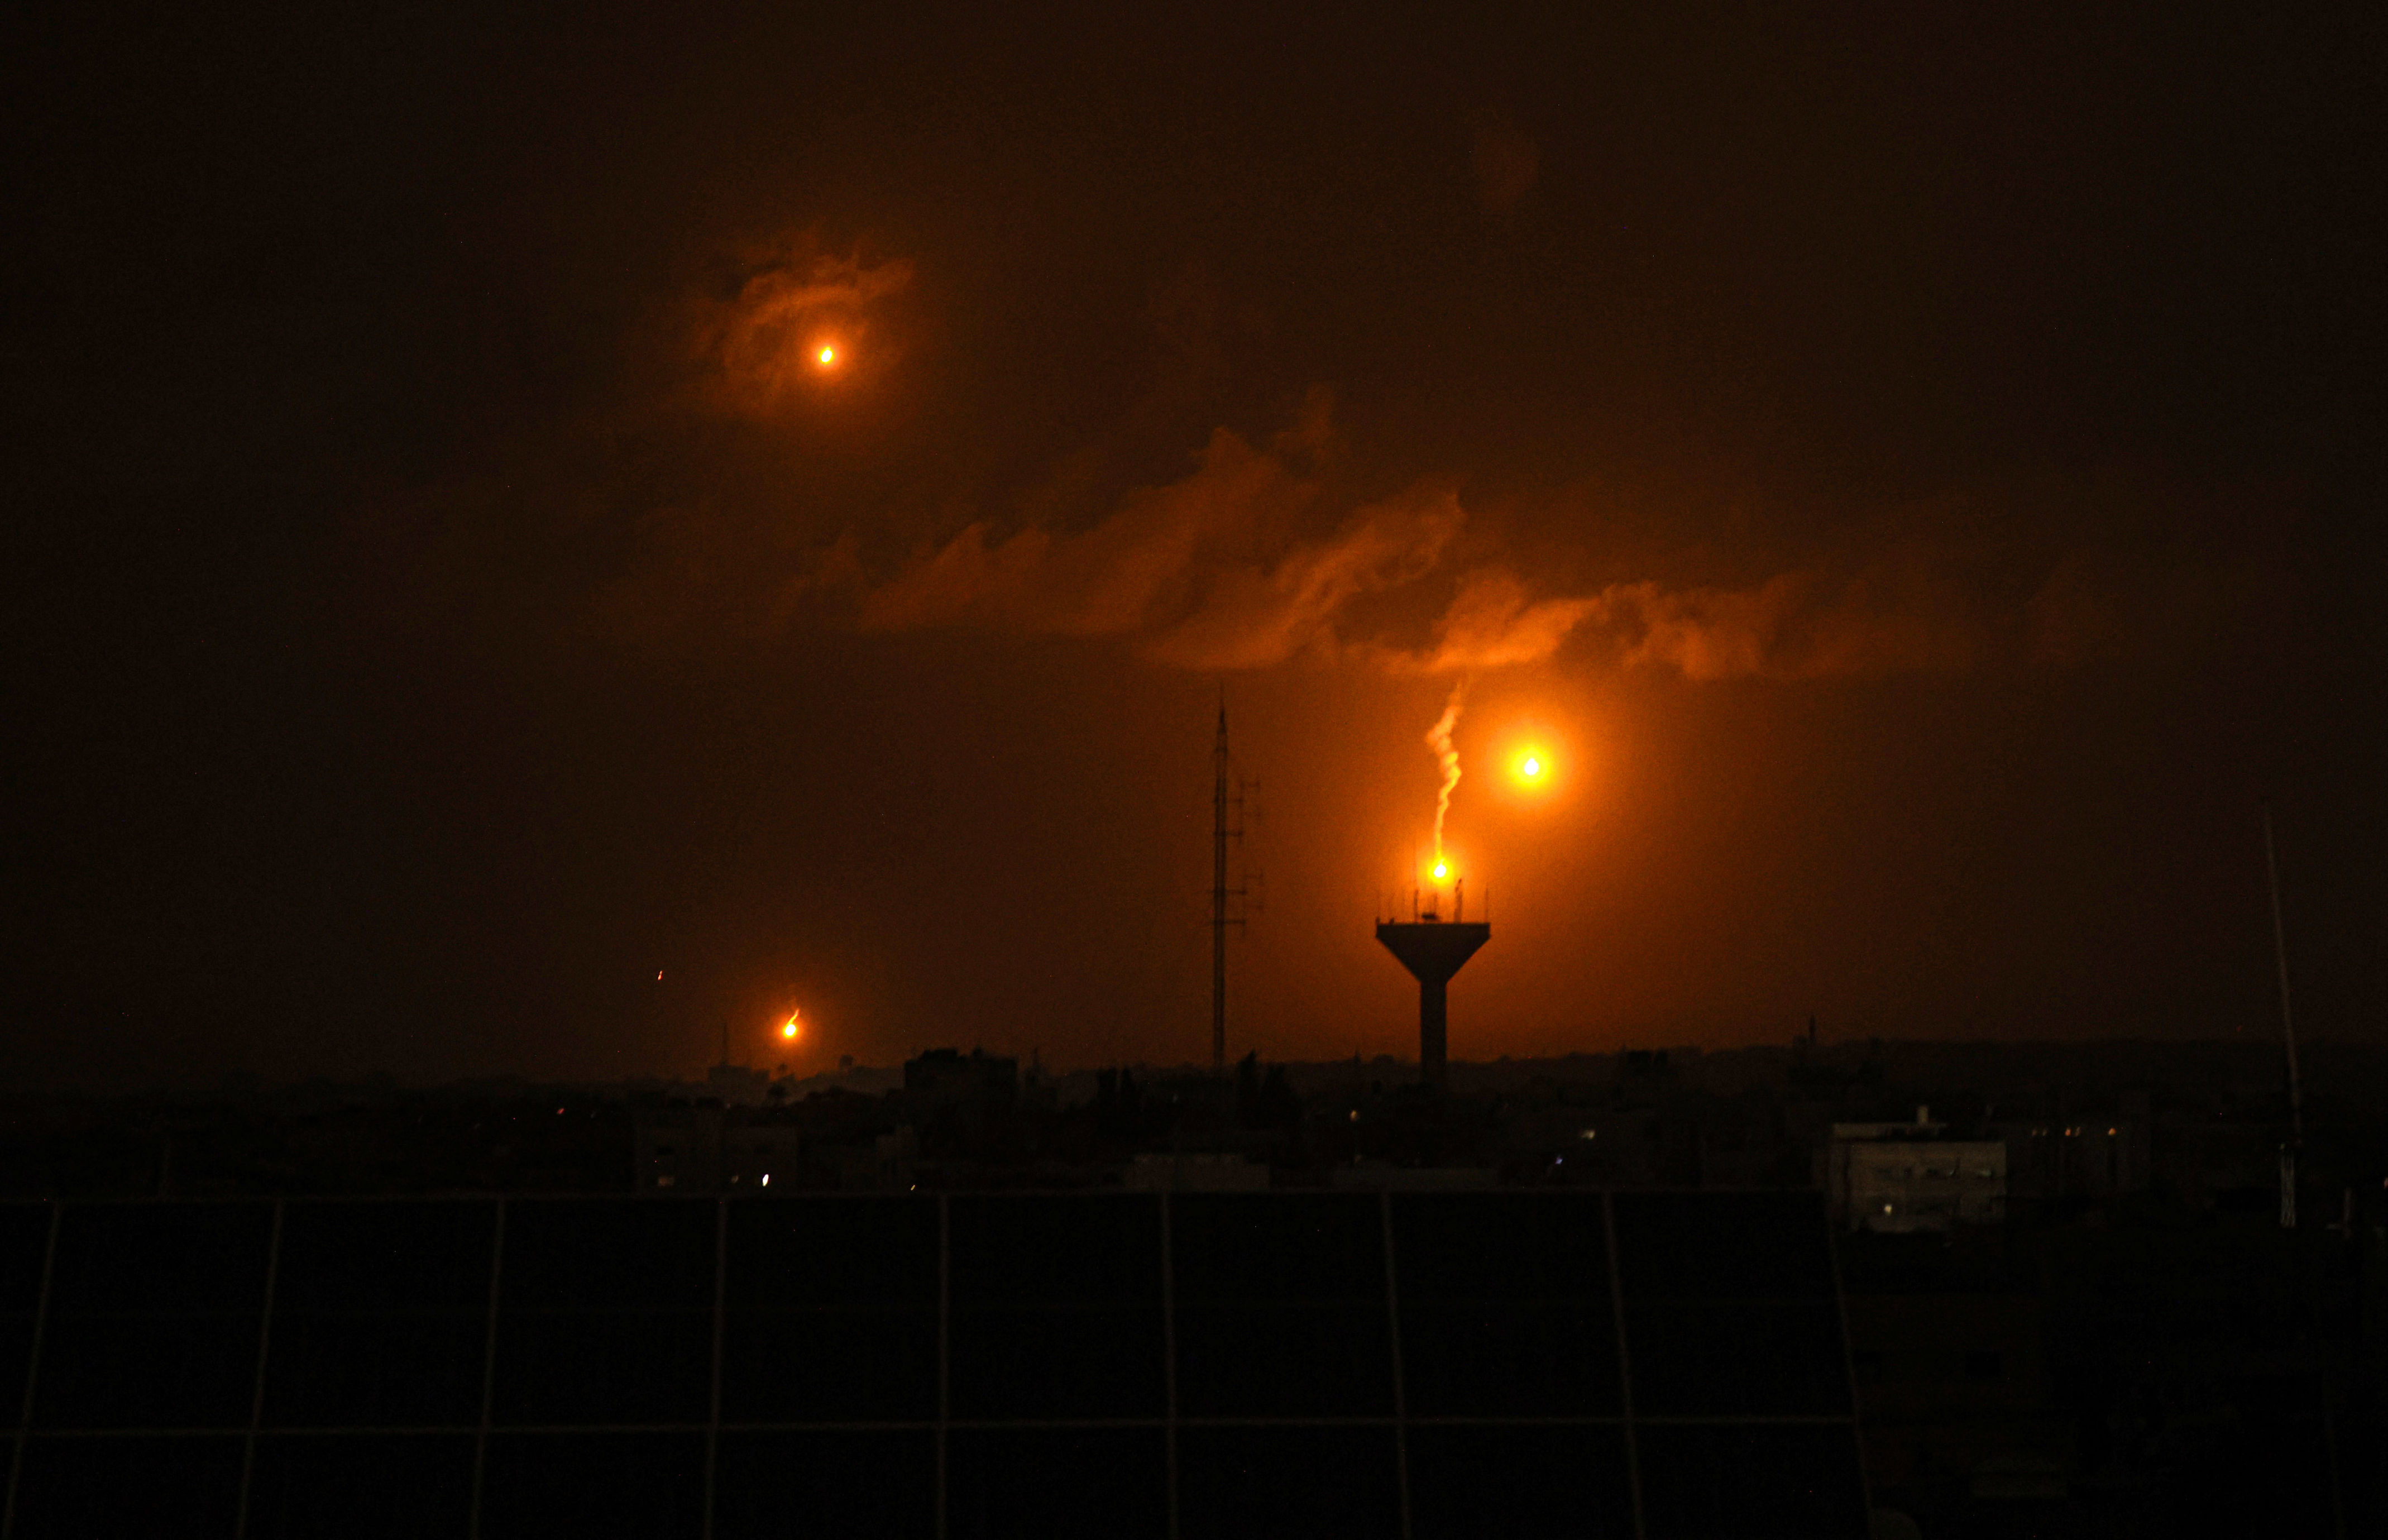 israel-gaza war live updates: intense fighting traps thousands in khan younis hospital, relief group says